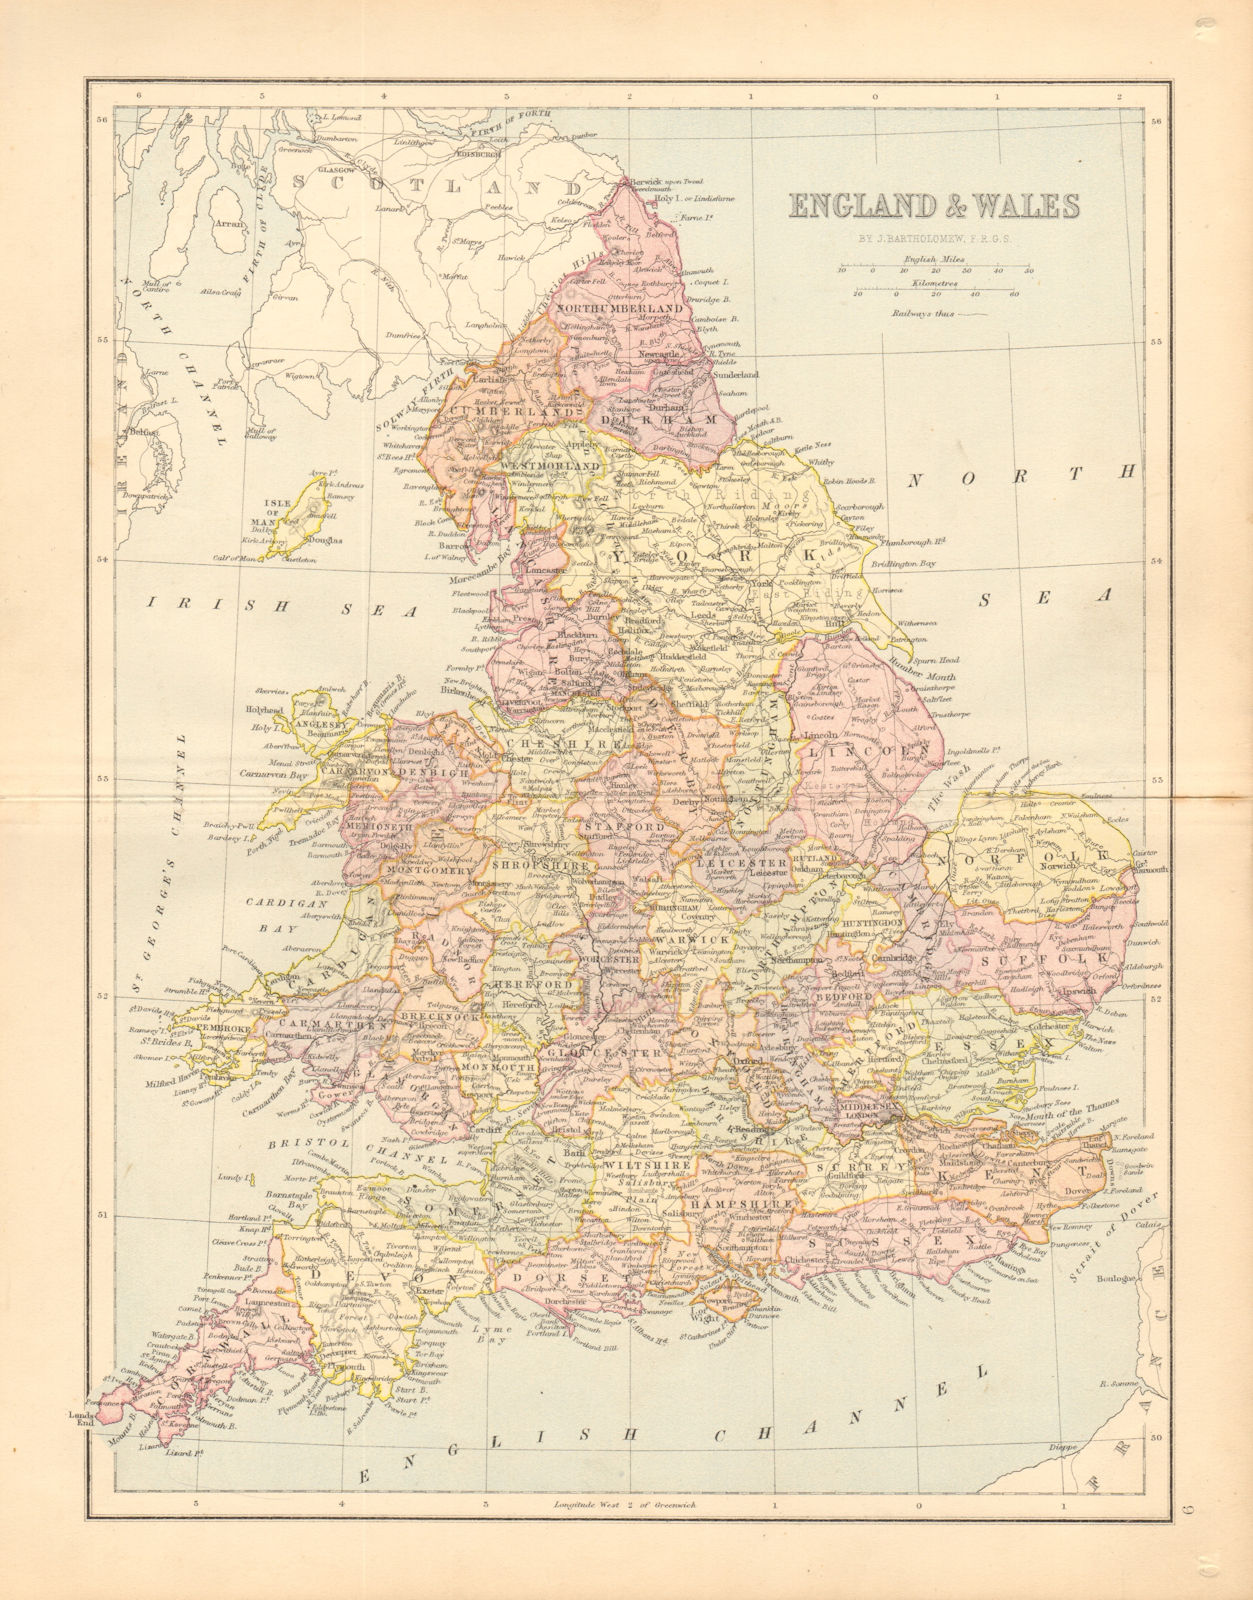 Associate Product GREAT BRITAIN. 'England & Wales'. Counties. Railways. BARTHOLOMEW 1876 old map